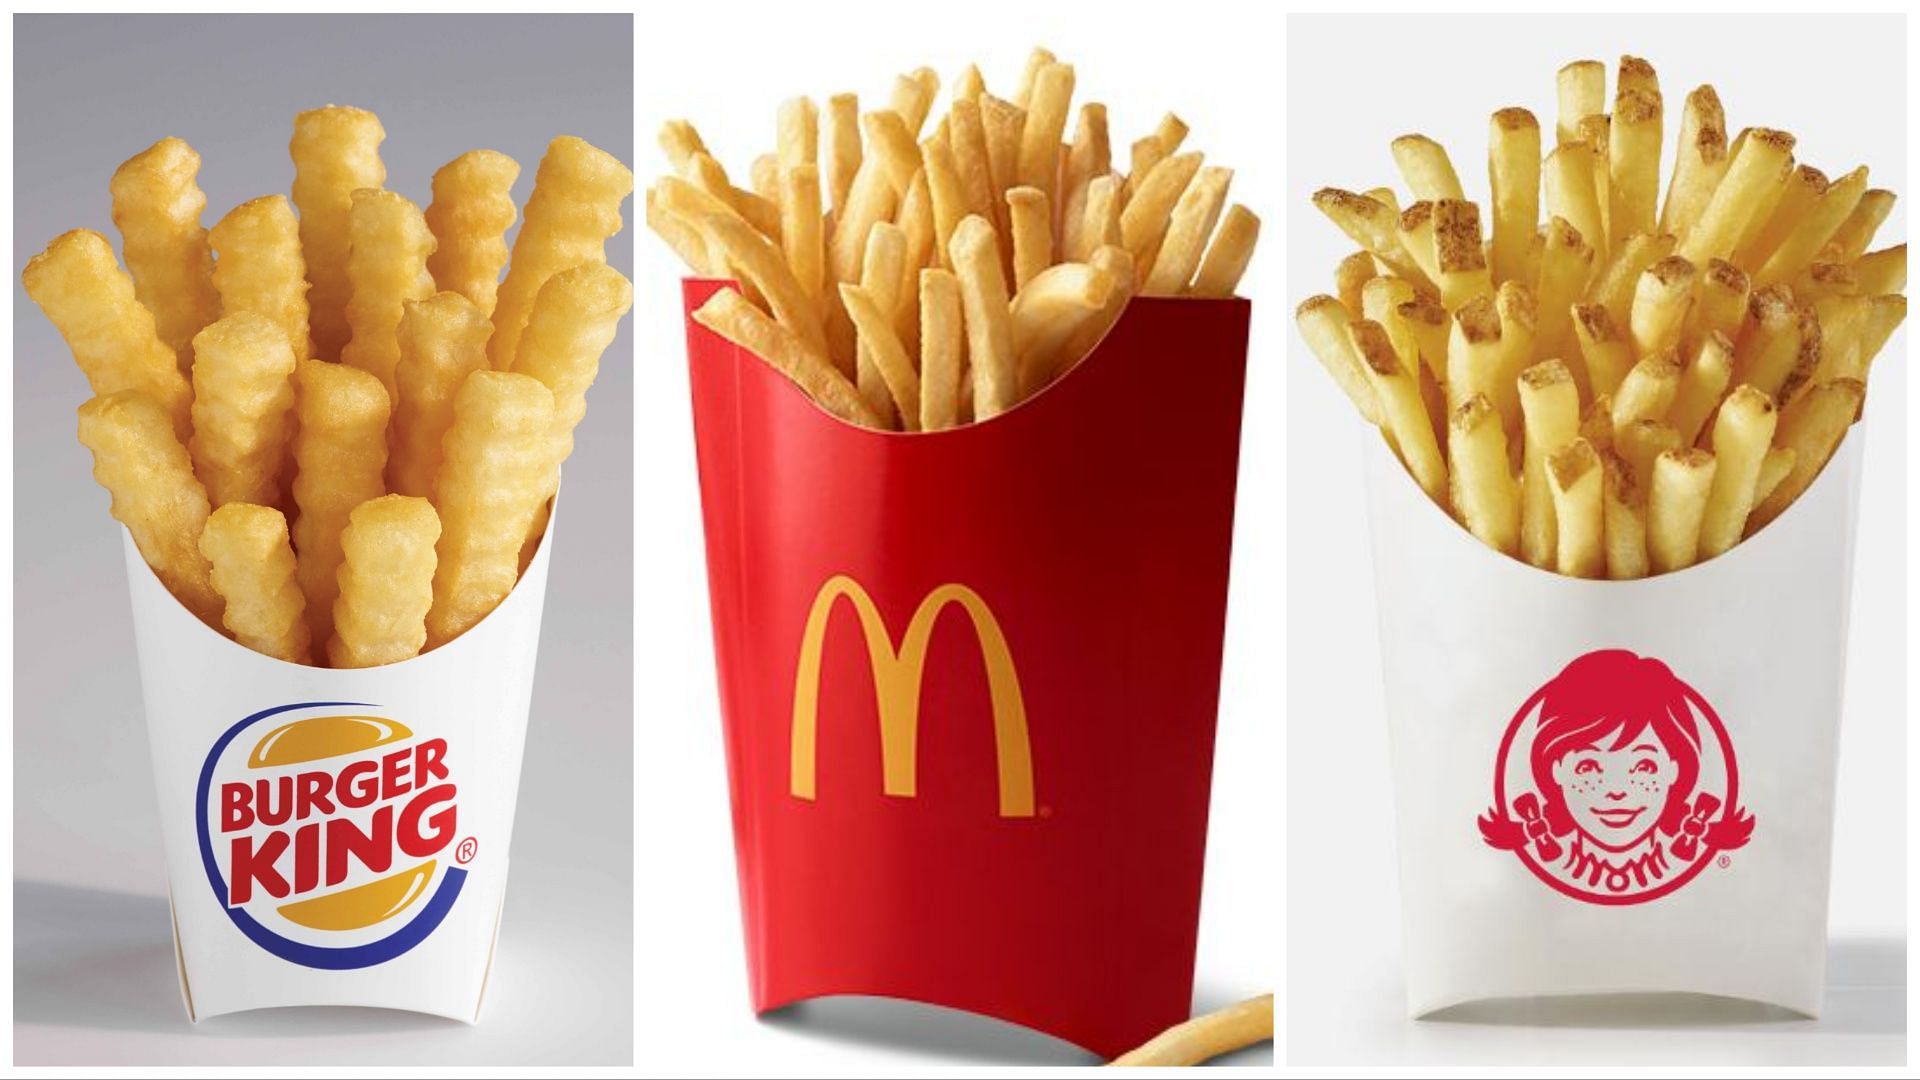 Several brands are offering amazing and tempting deals (Image via Burger King / Mcdonald&rsquo;s / Wendy&rsquo;s)